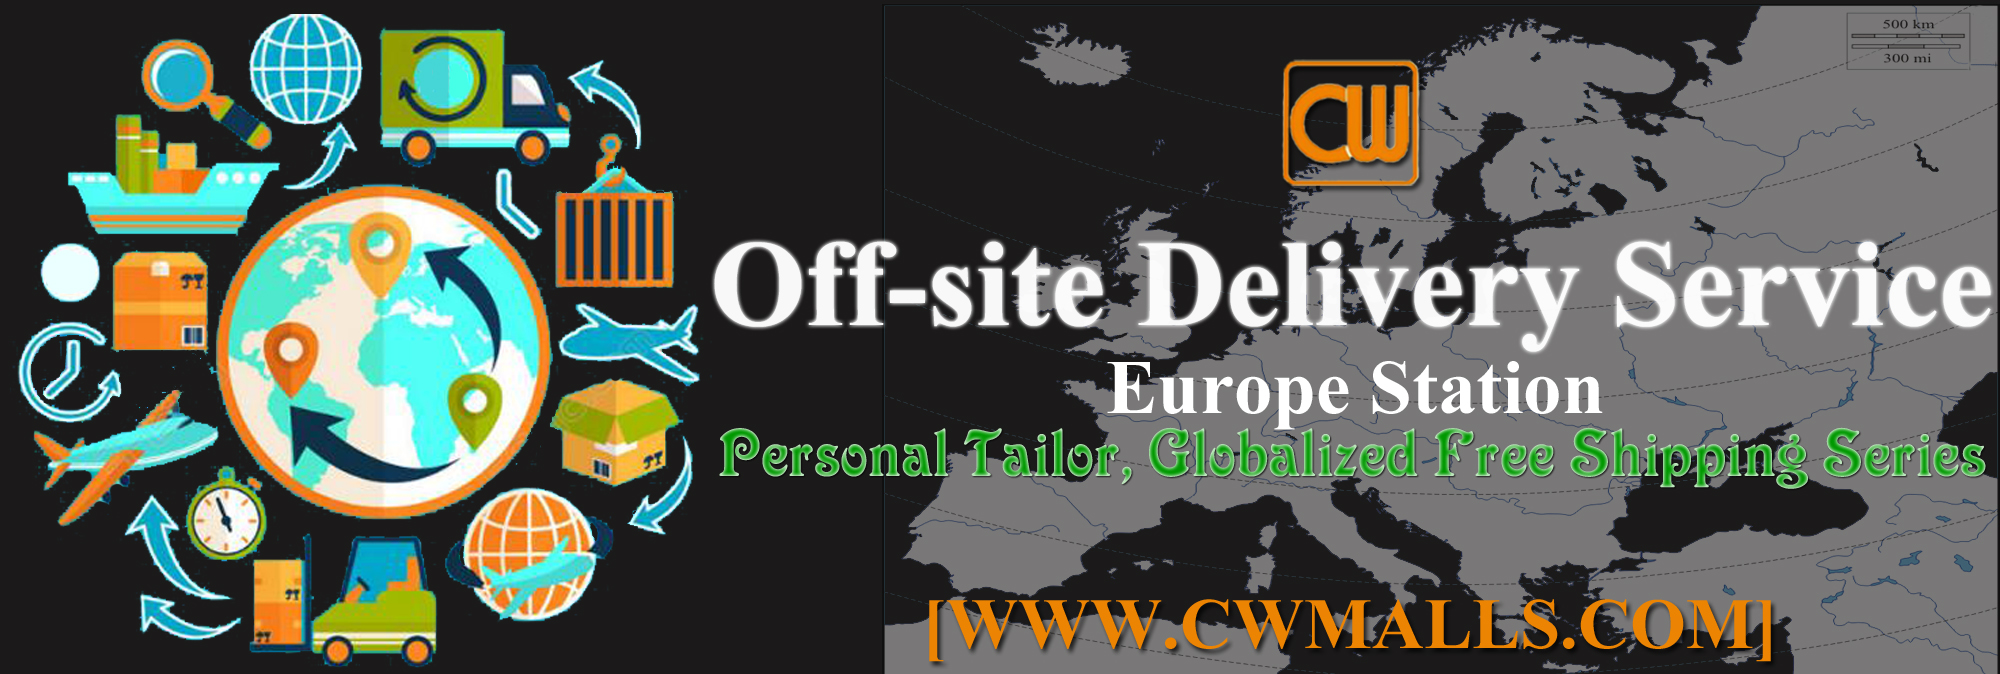 Personal Tailor, Globalized Free Shipping Series — CWMALLS Off-site Delivery Service